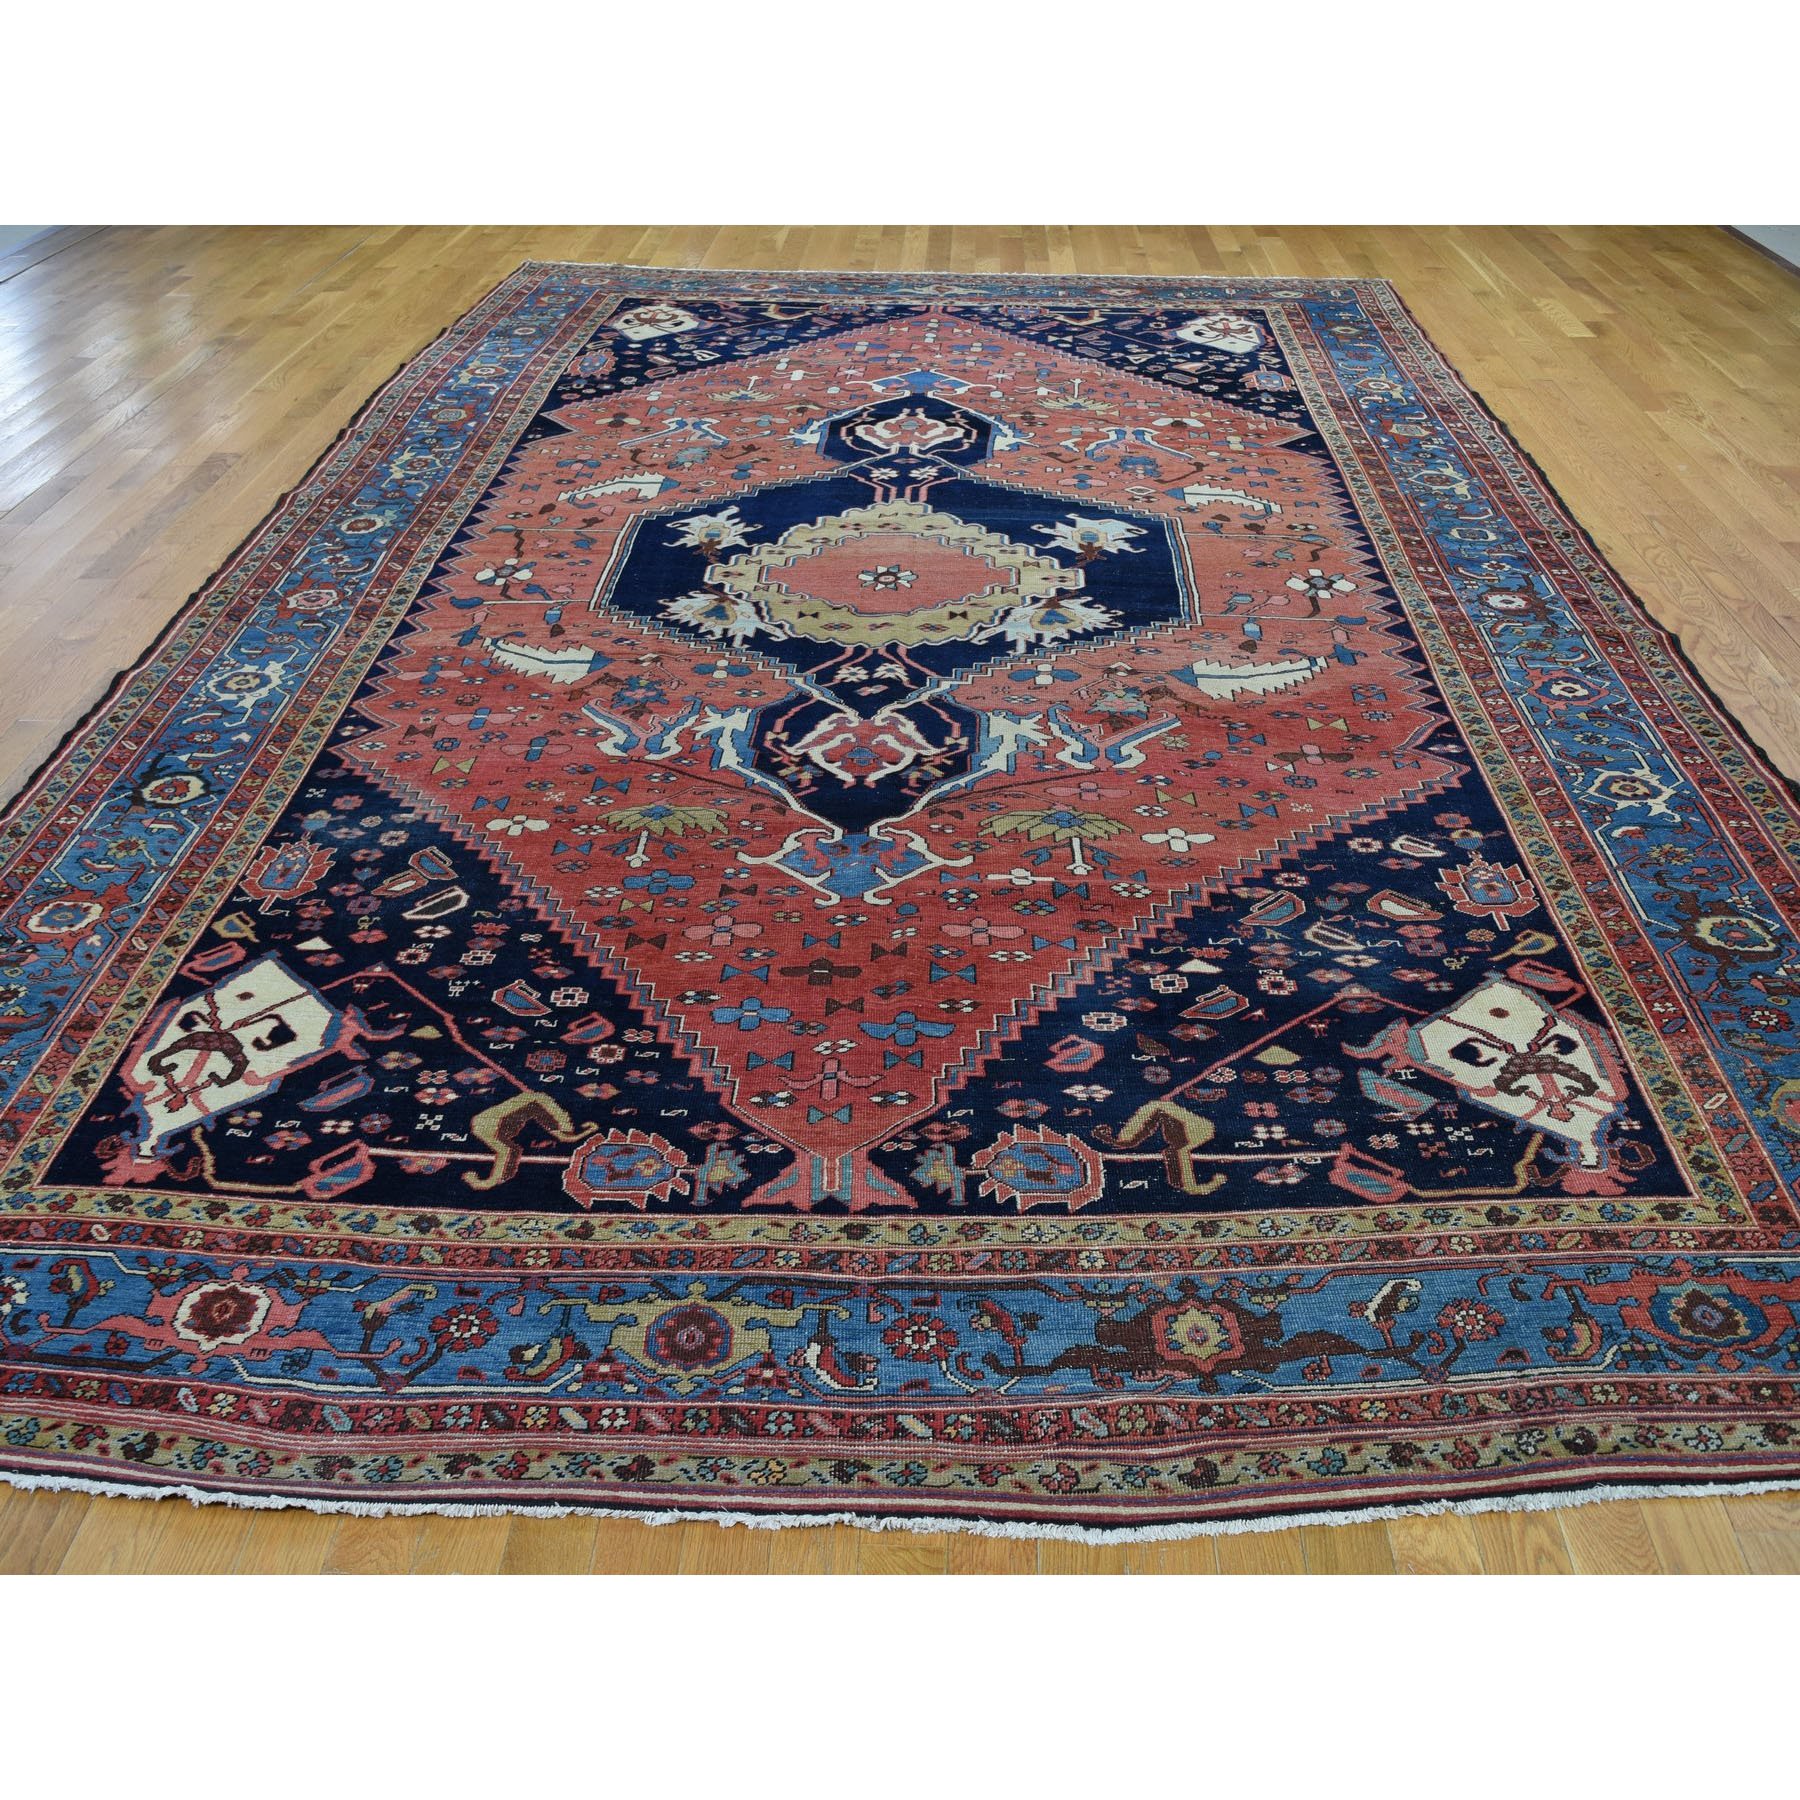 9'5"x14'10" Terracotta Red Antique Persian Bakshaish Good Condition Clean Pure Wool Hand Woven Rug 